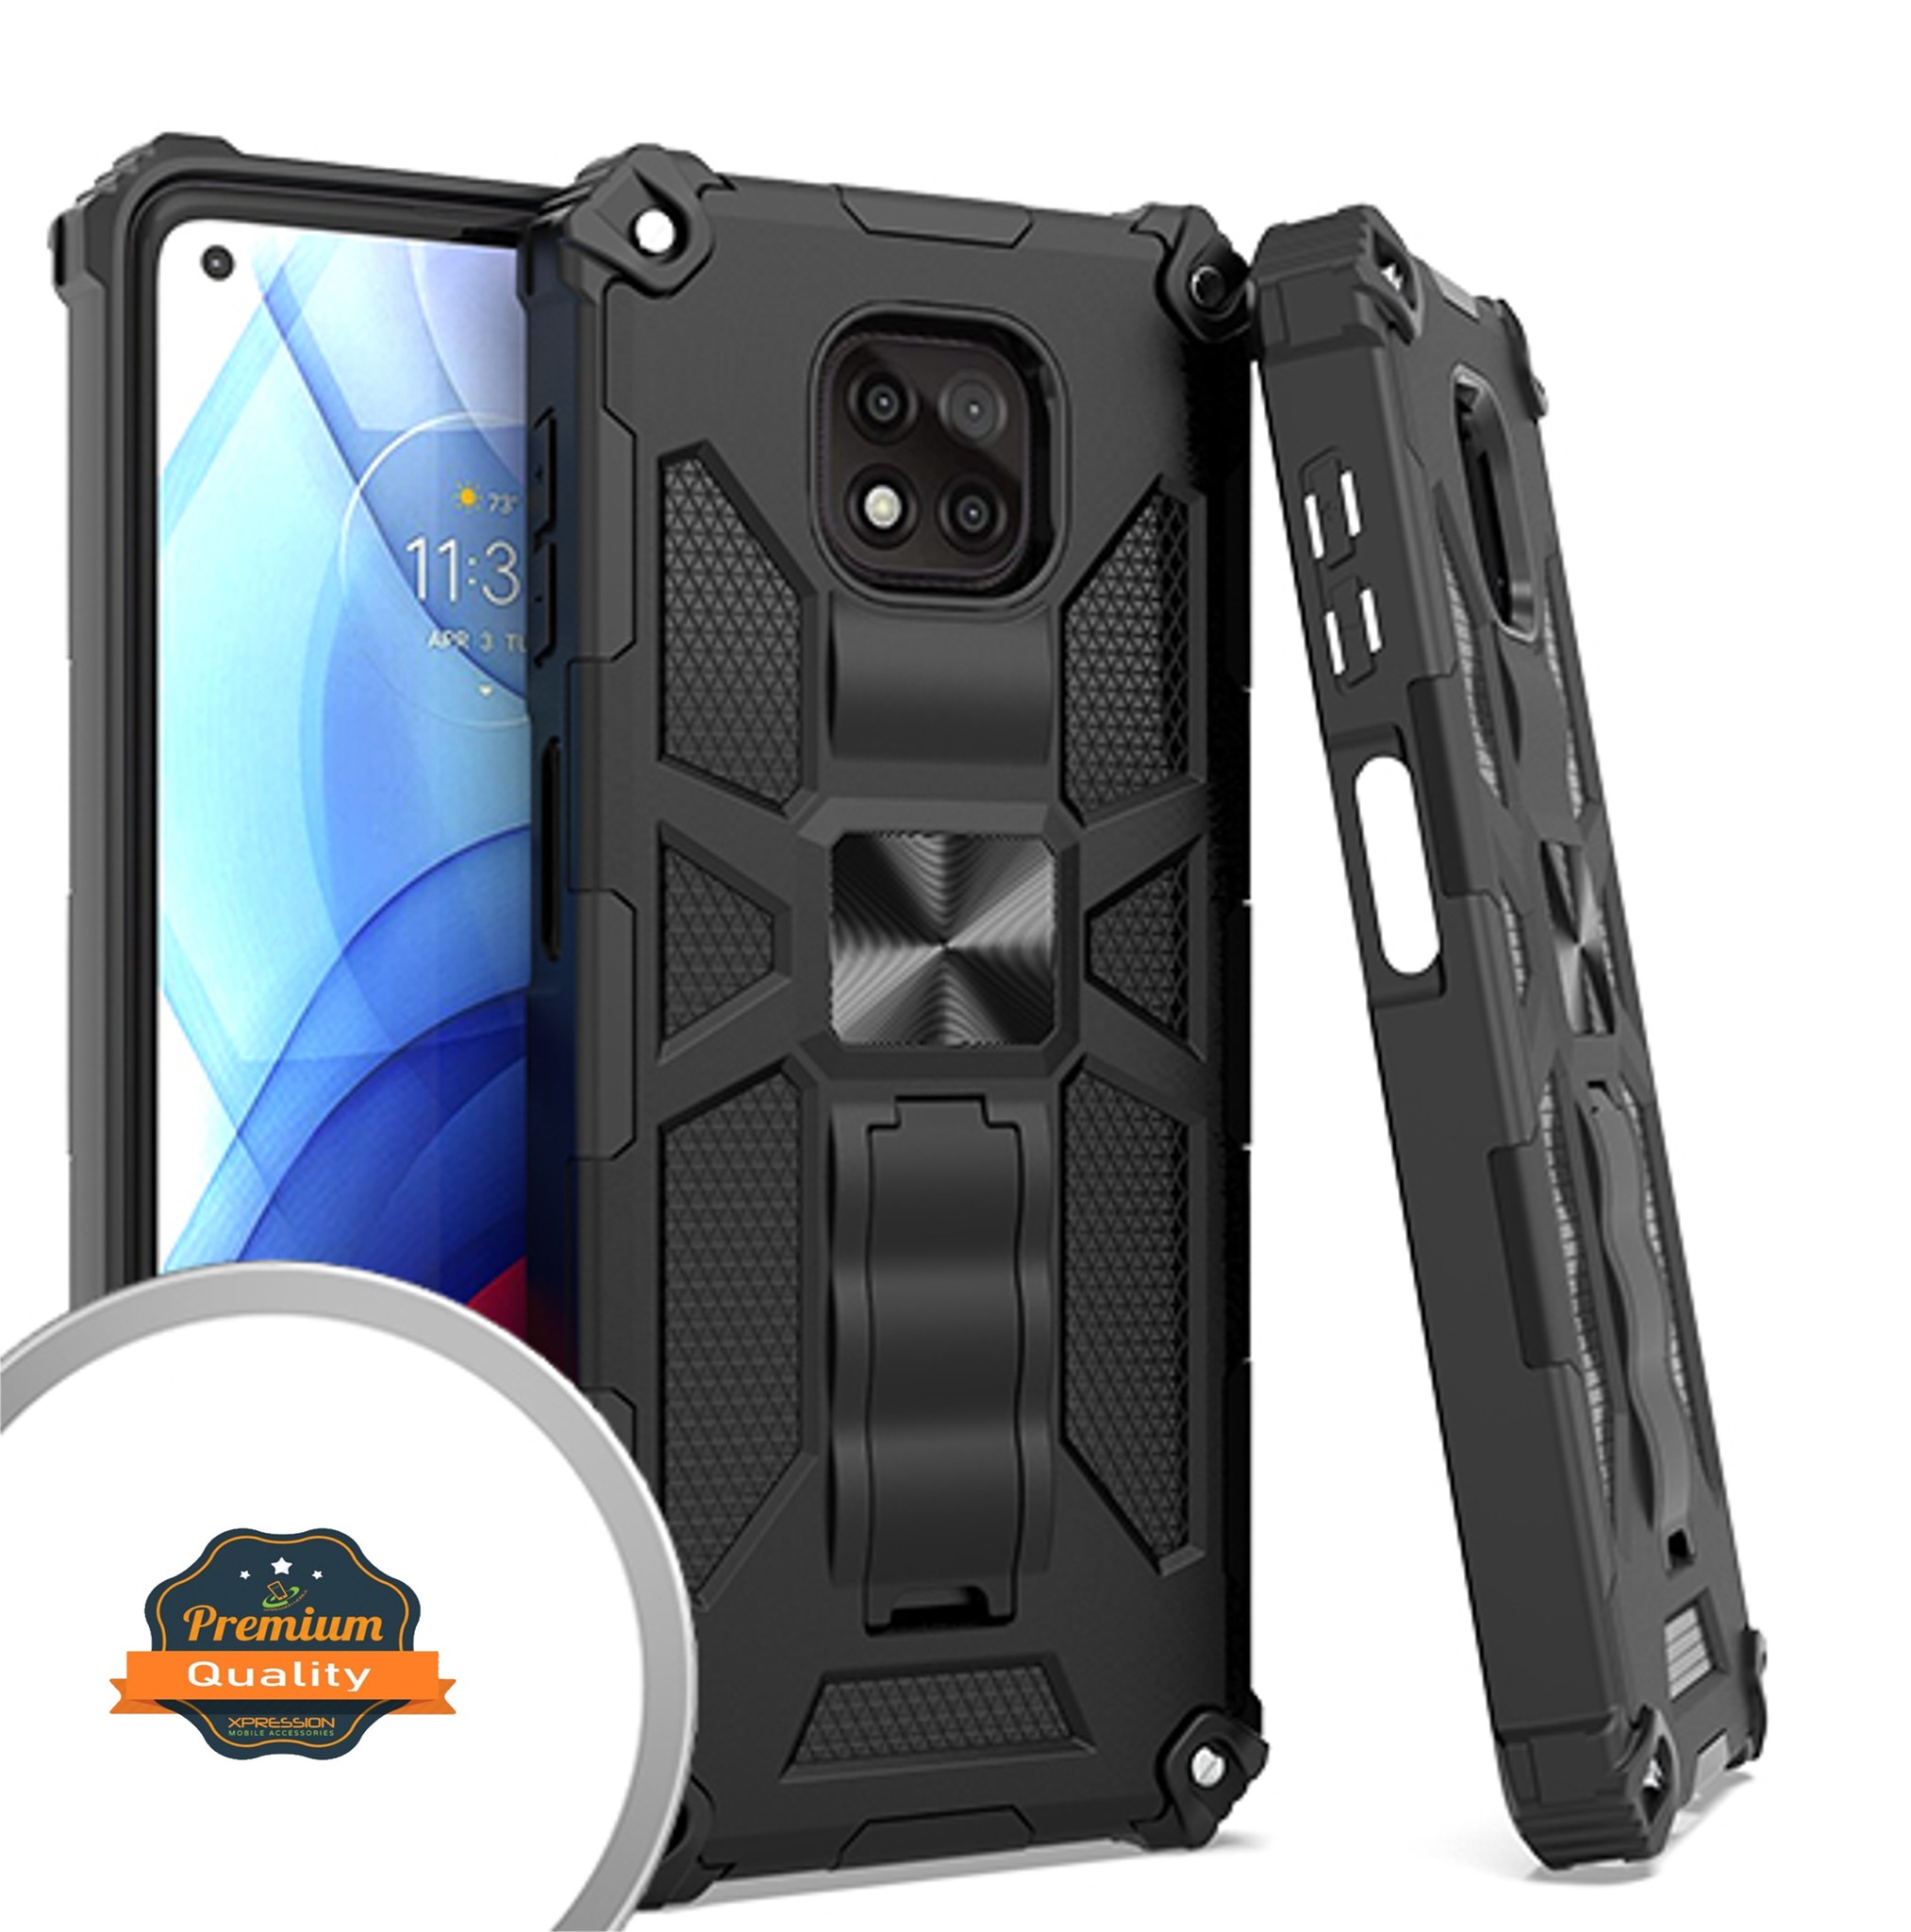 Xpression Case for Motorola Moto G Power 2021 with Invisible Kickstand Stand Dual Layer Hybrid Defender Military Grade Shockproof Hard TPU Phone Cover [Black] - image 2 of 8